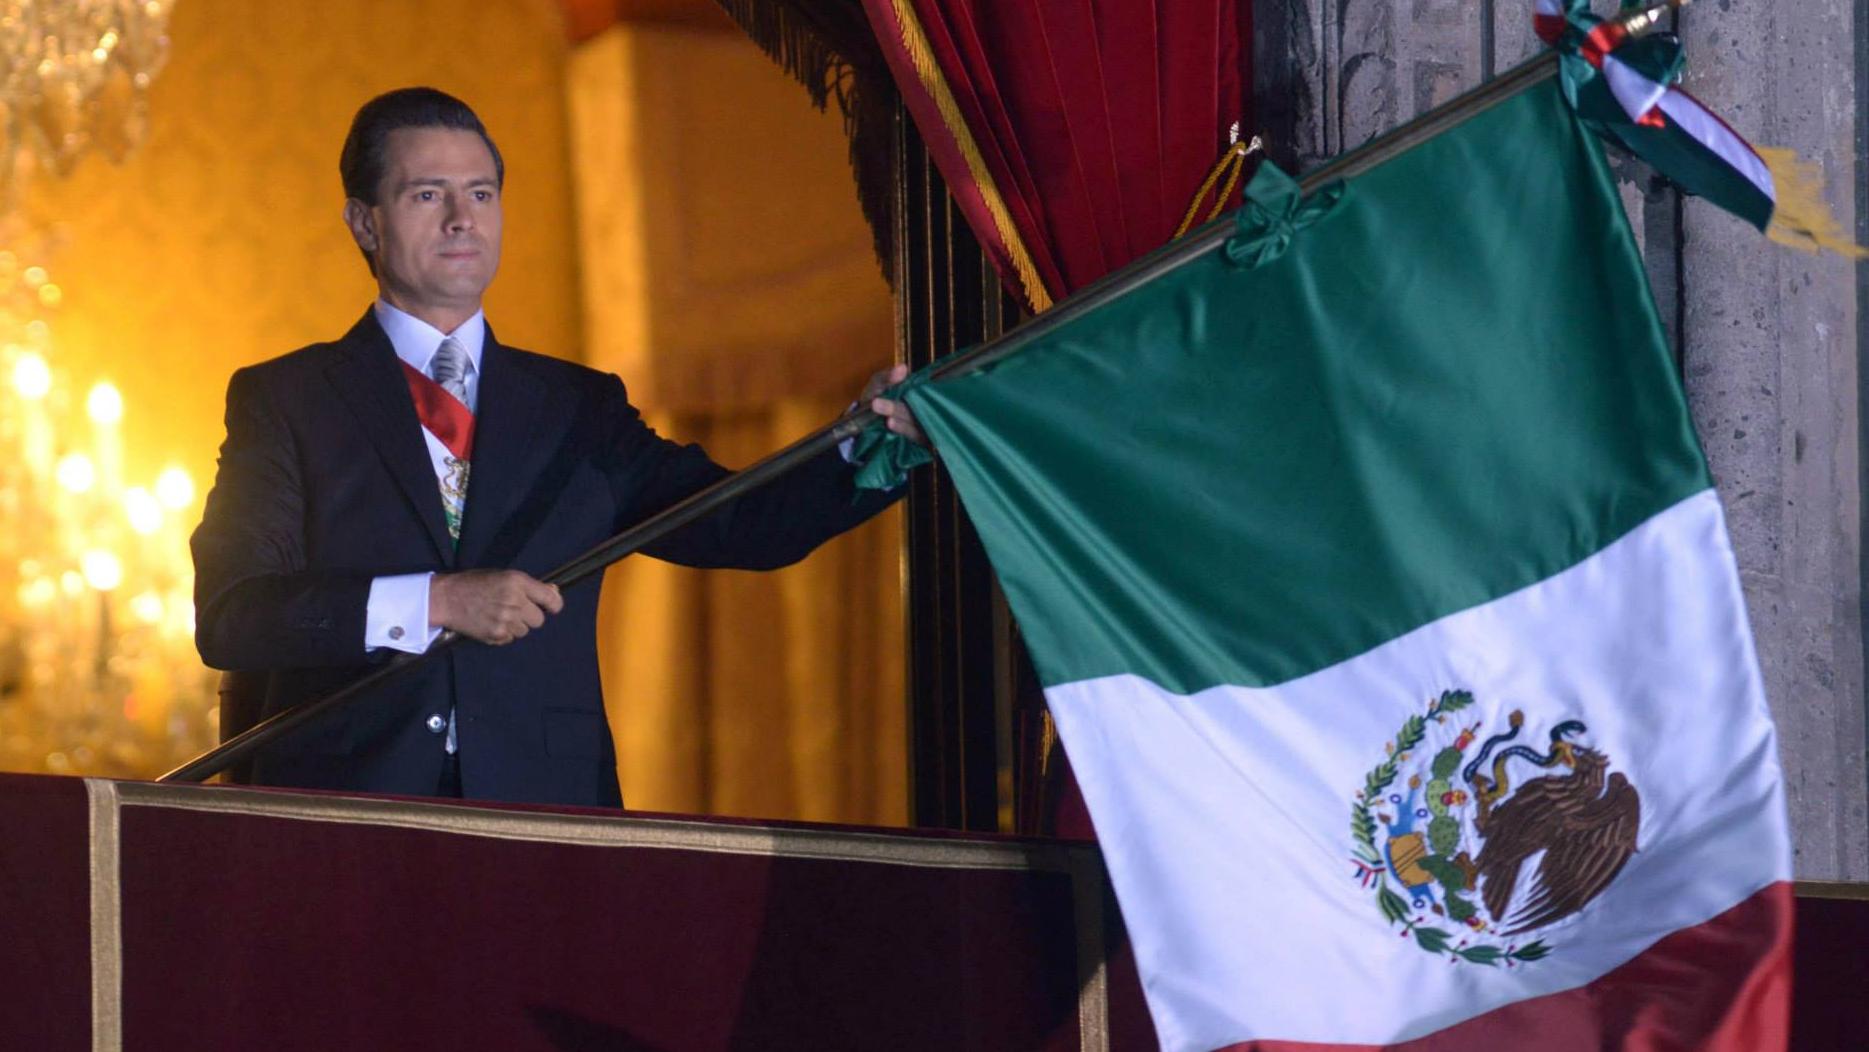 Mexican President Enrique Peña Nieto waves the National flag during the independence ceremony in Mexico City, 15 September 2015.